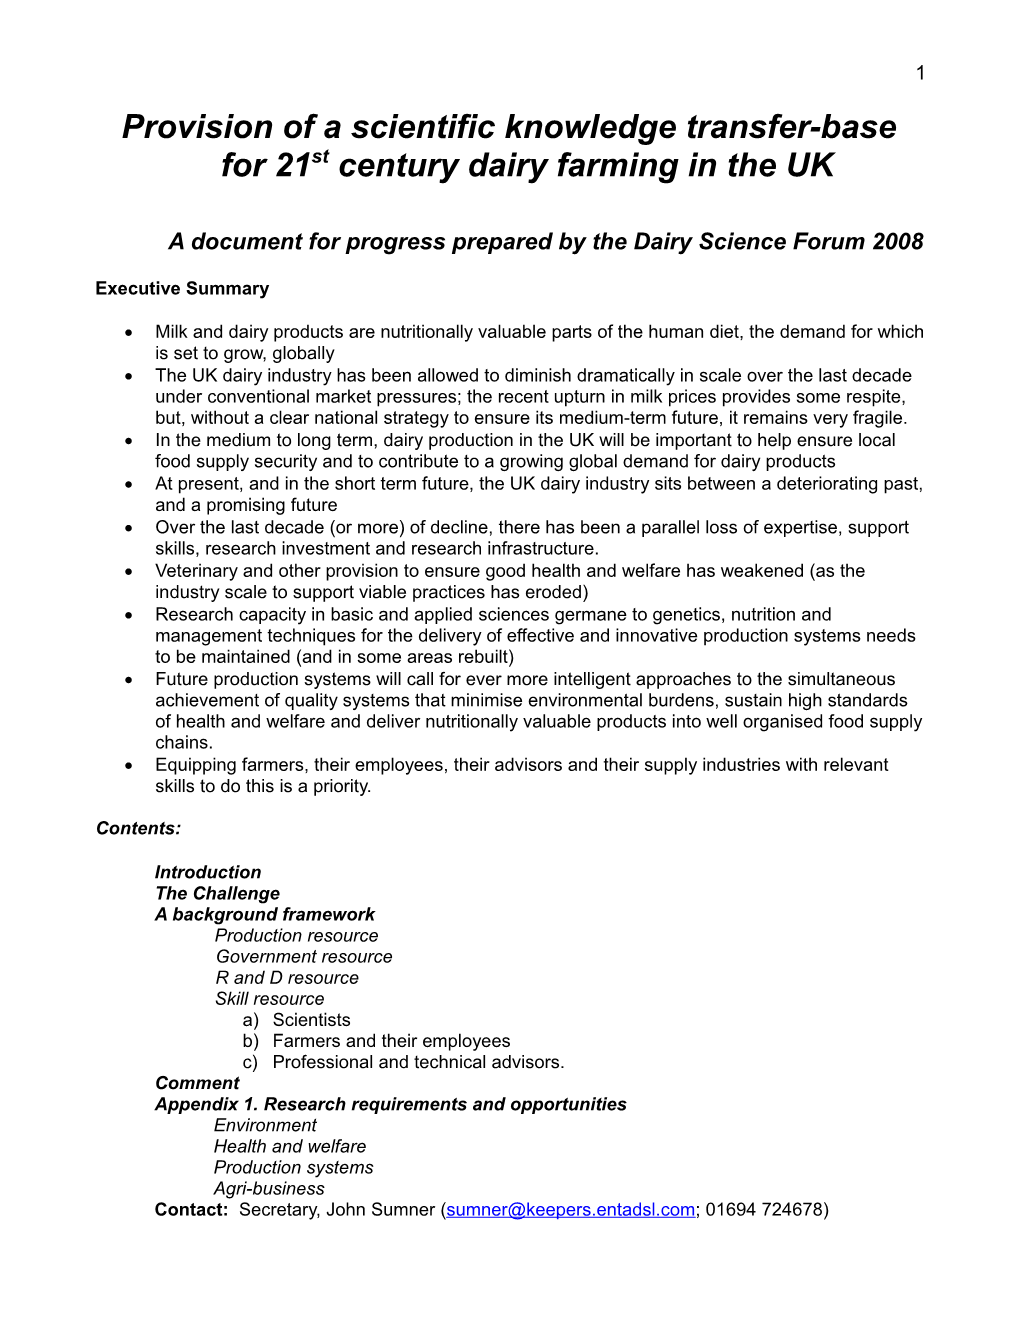 The Dairy Science Forum